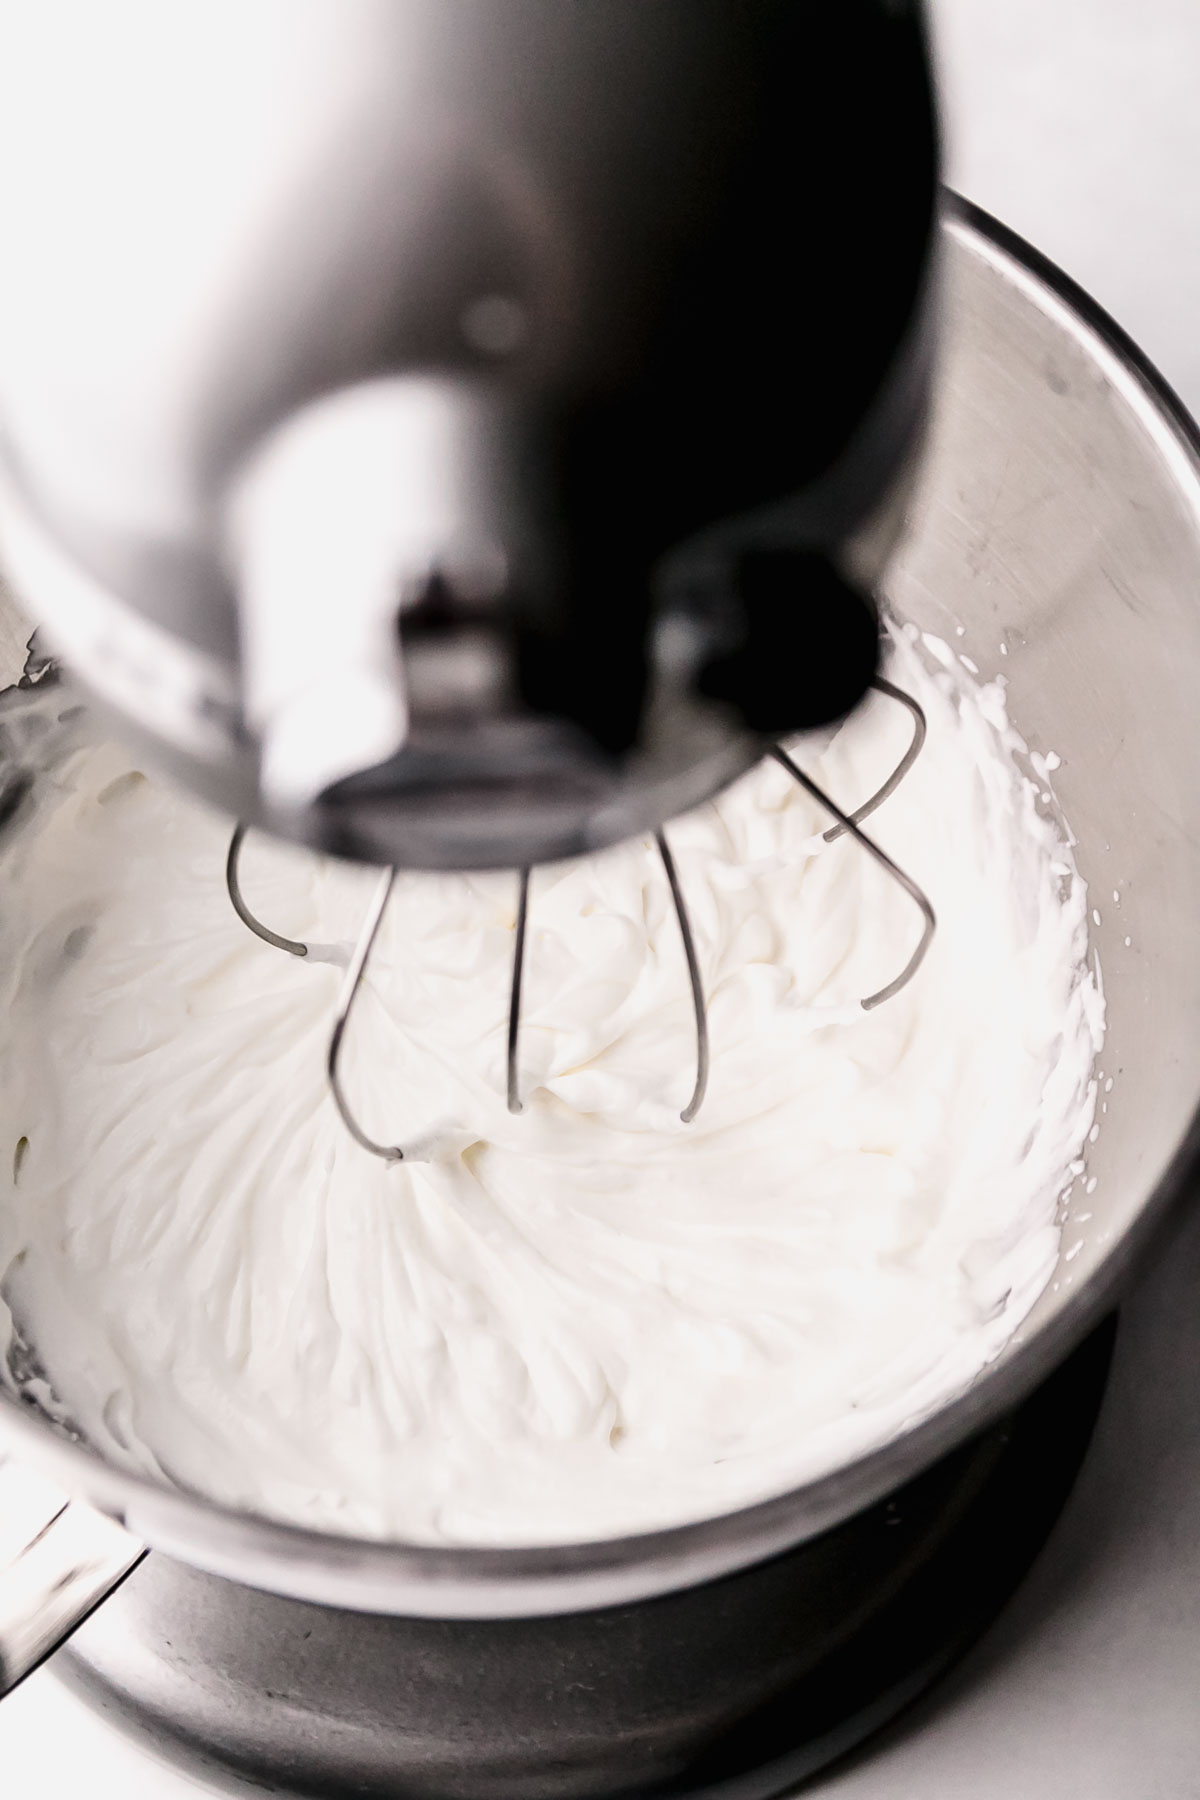 Whipped cream in stand mixer bowl with whisk attachment.